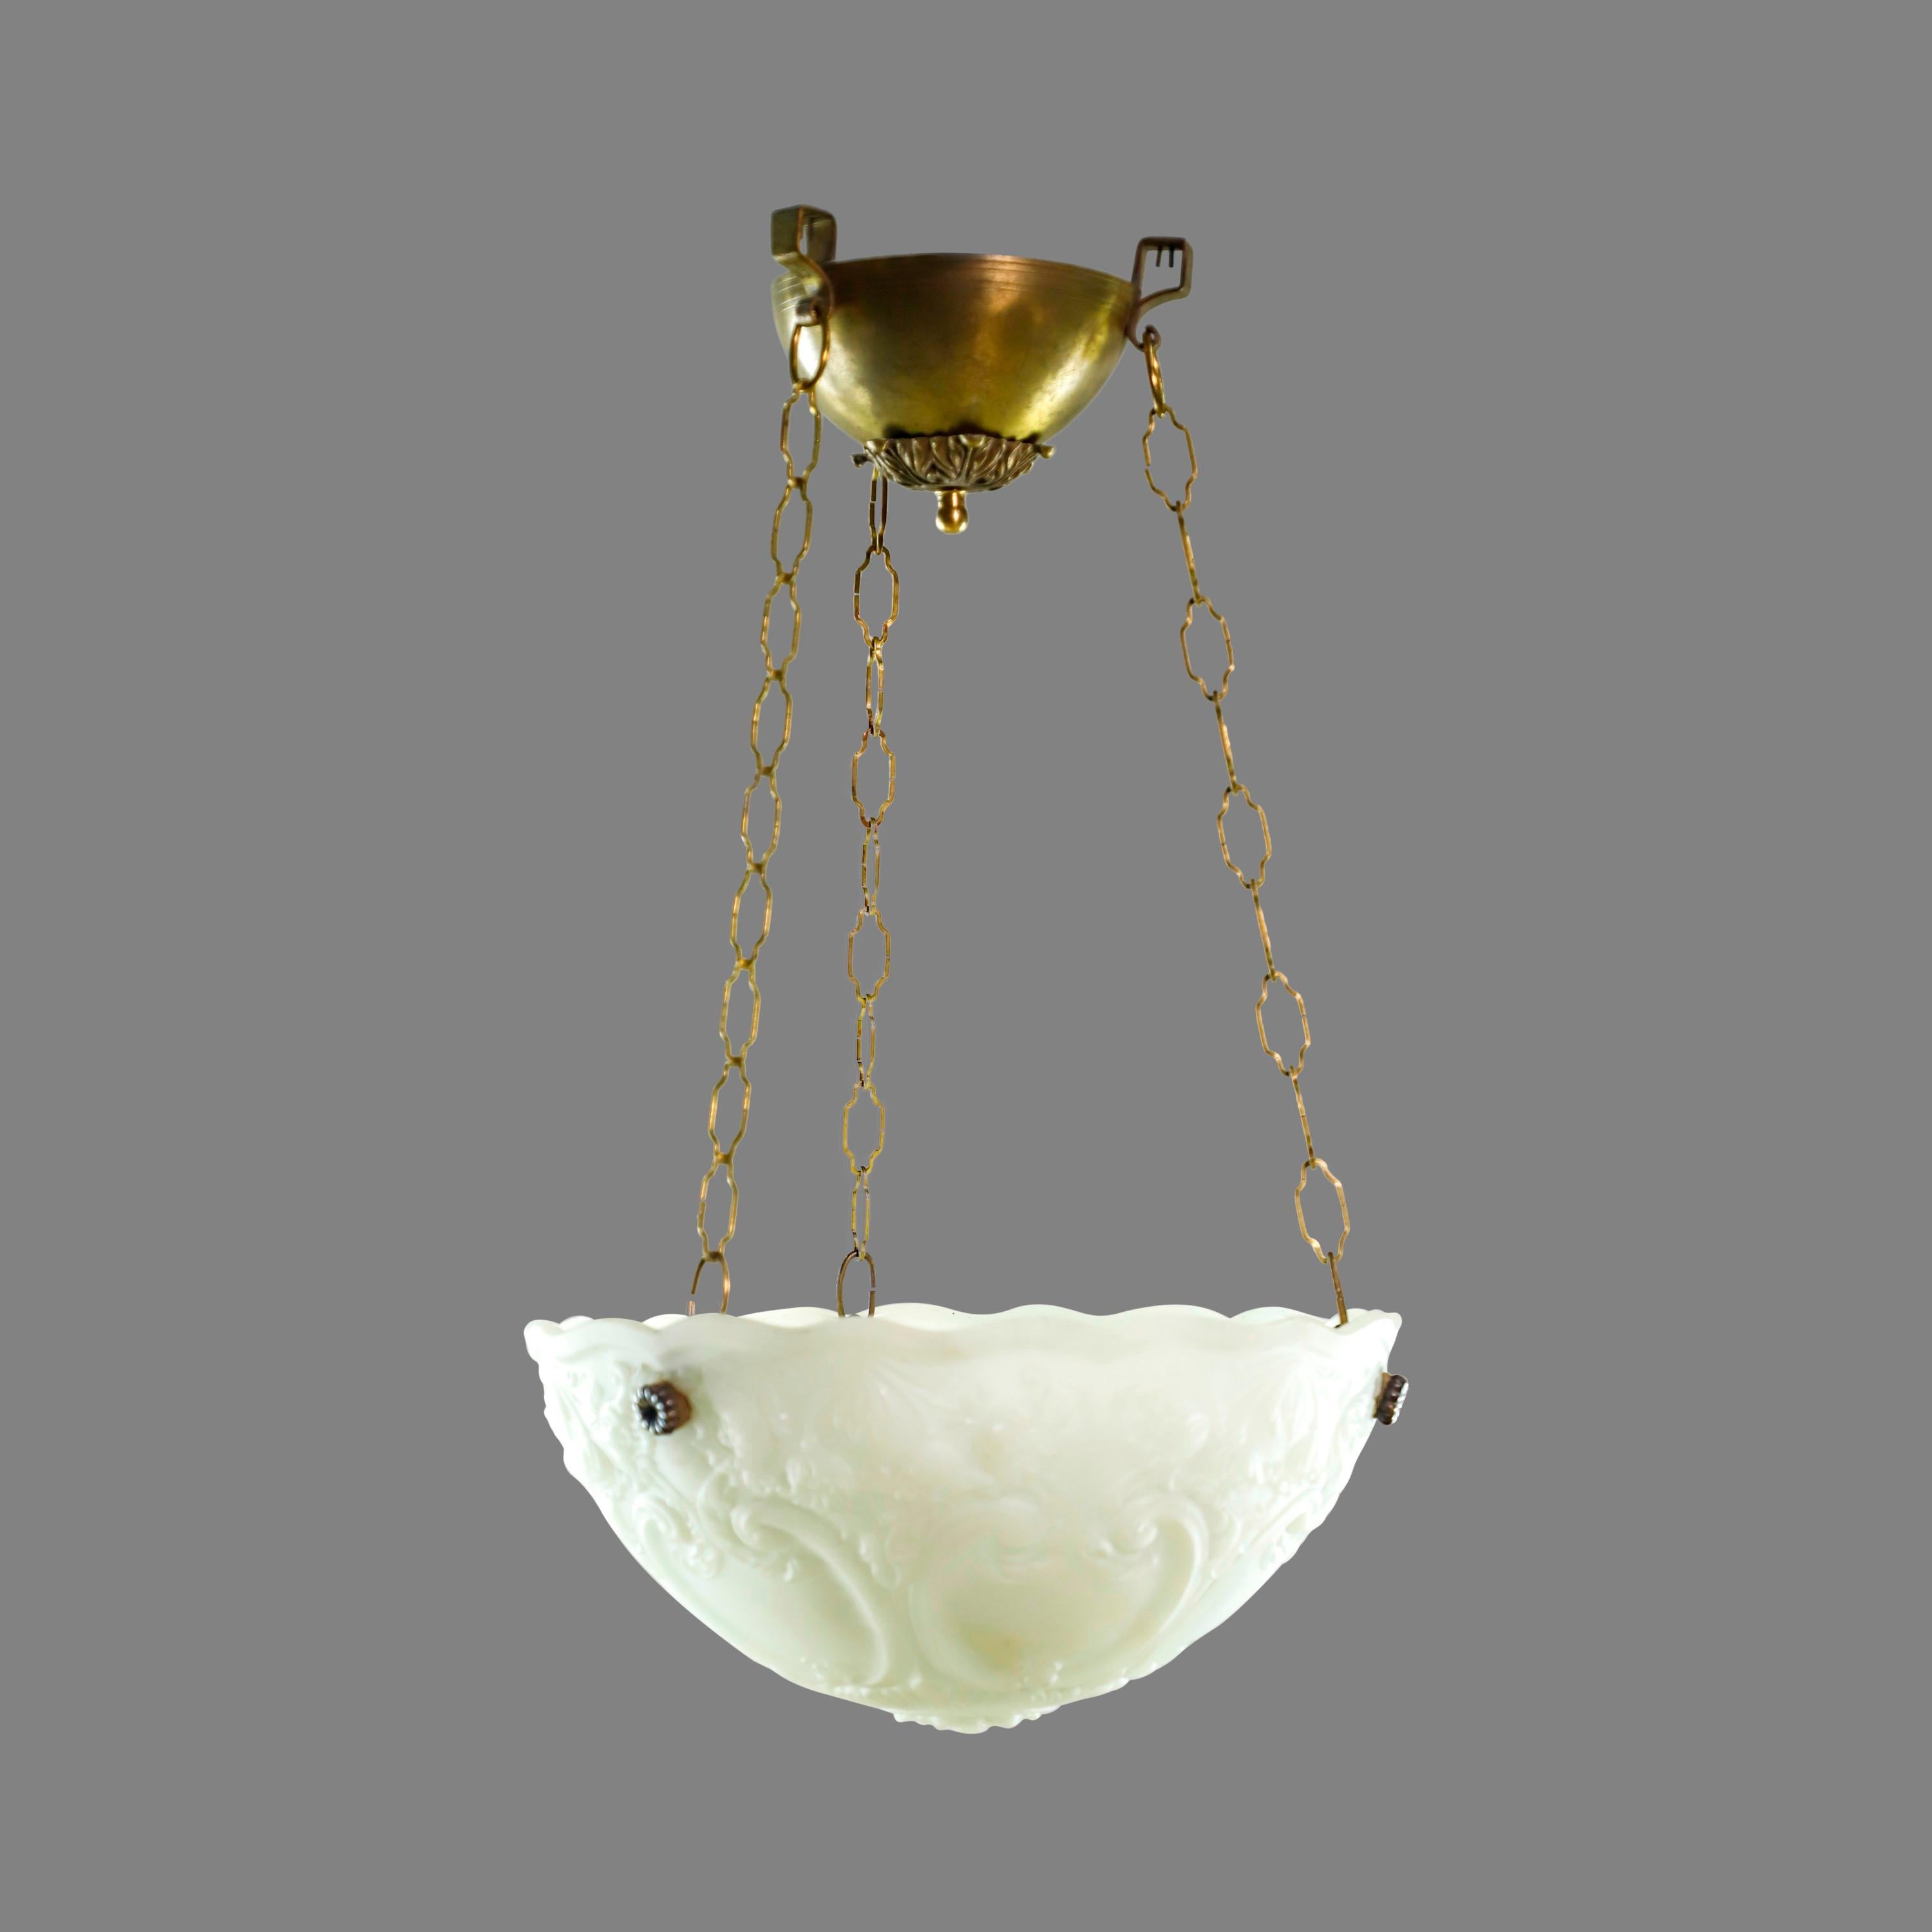 Neoclassical white glass dish pendant light with ornate cast details suspended from three chains with a brass fitter. Cleaned and restored. Takes three medium base light bulbs. Please note, this item is located in our Scranton, PA location.